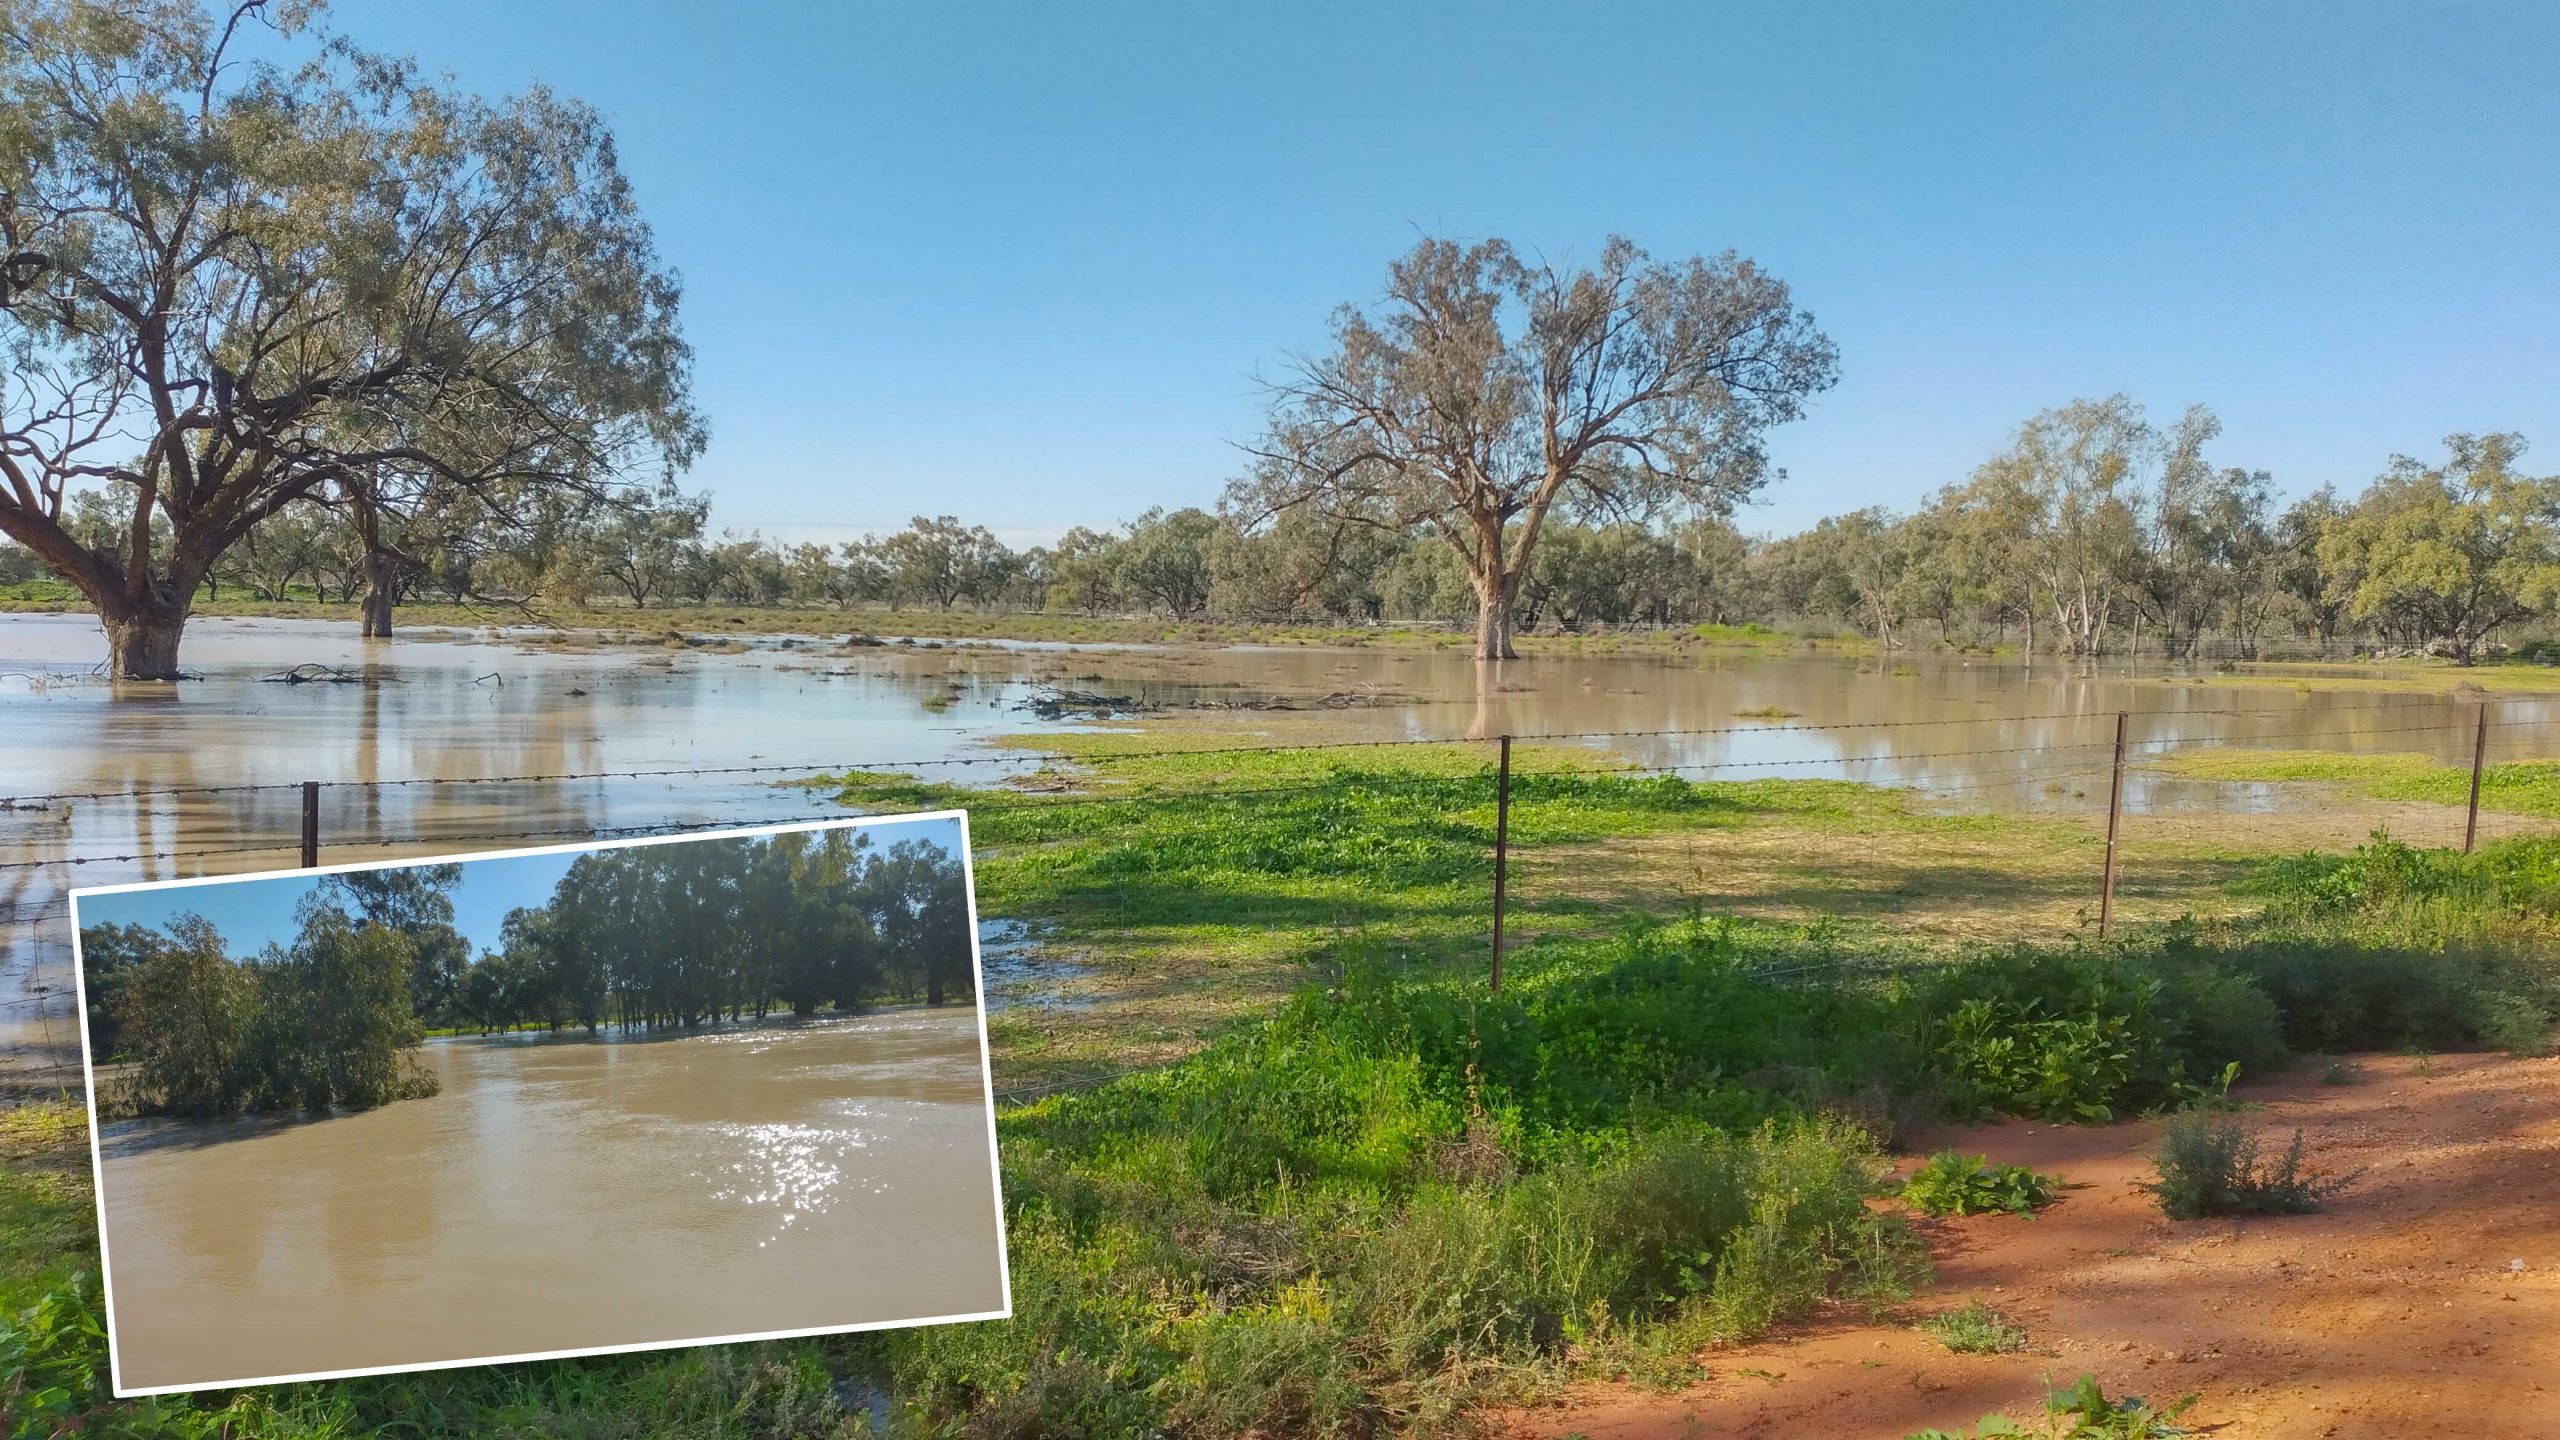 Flooding is beginning to impact Wilcannia, with flooding running down the Darling. Minor flooding is starting to effect Menindee.